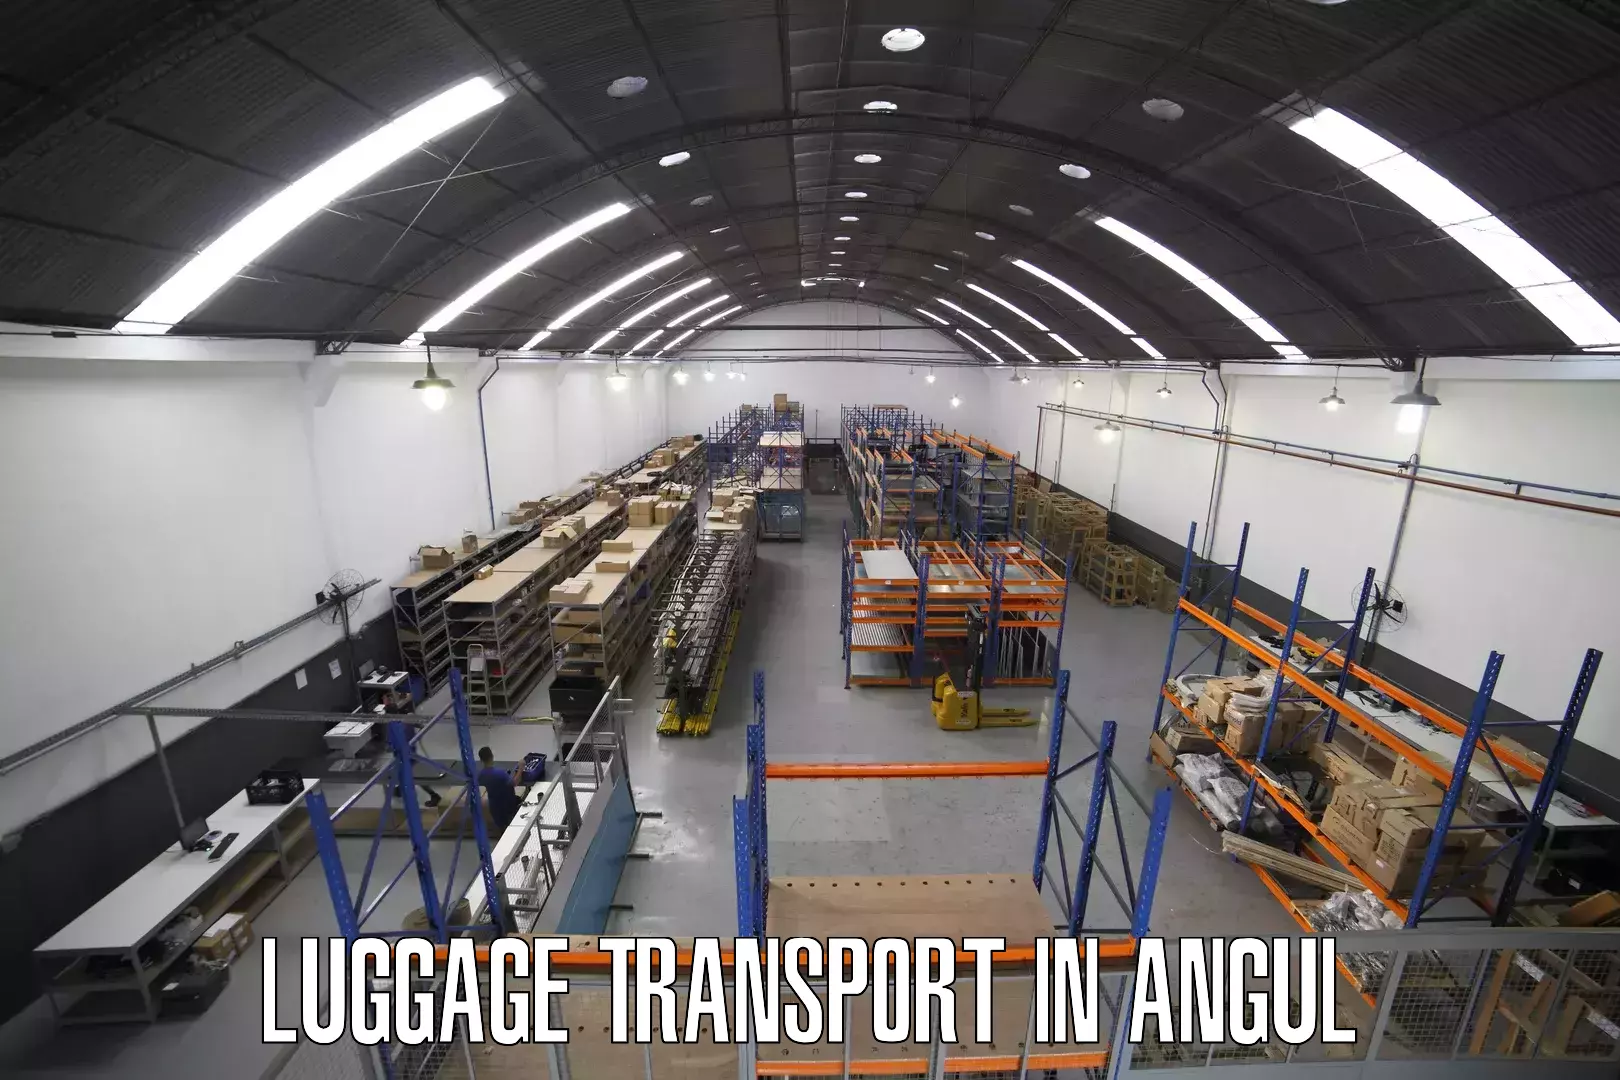 Luggage transport guidelines in Angul